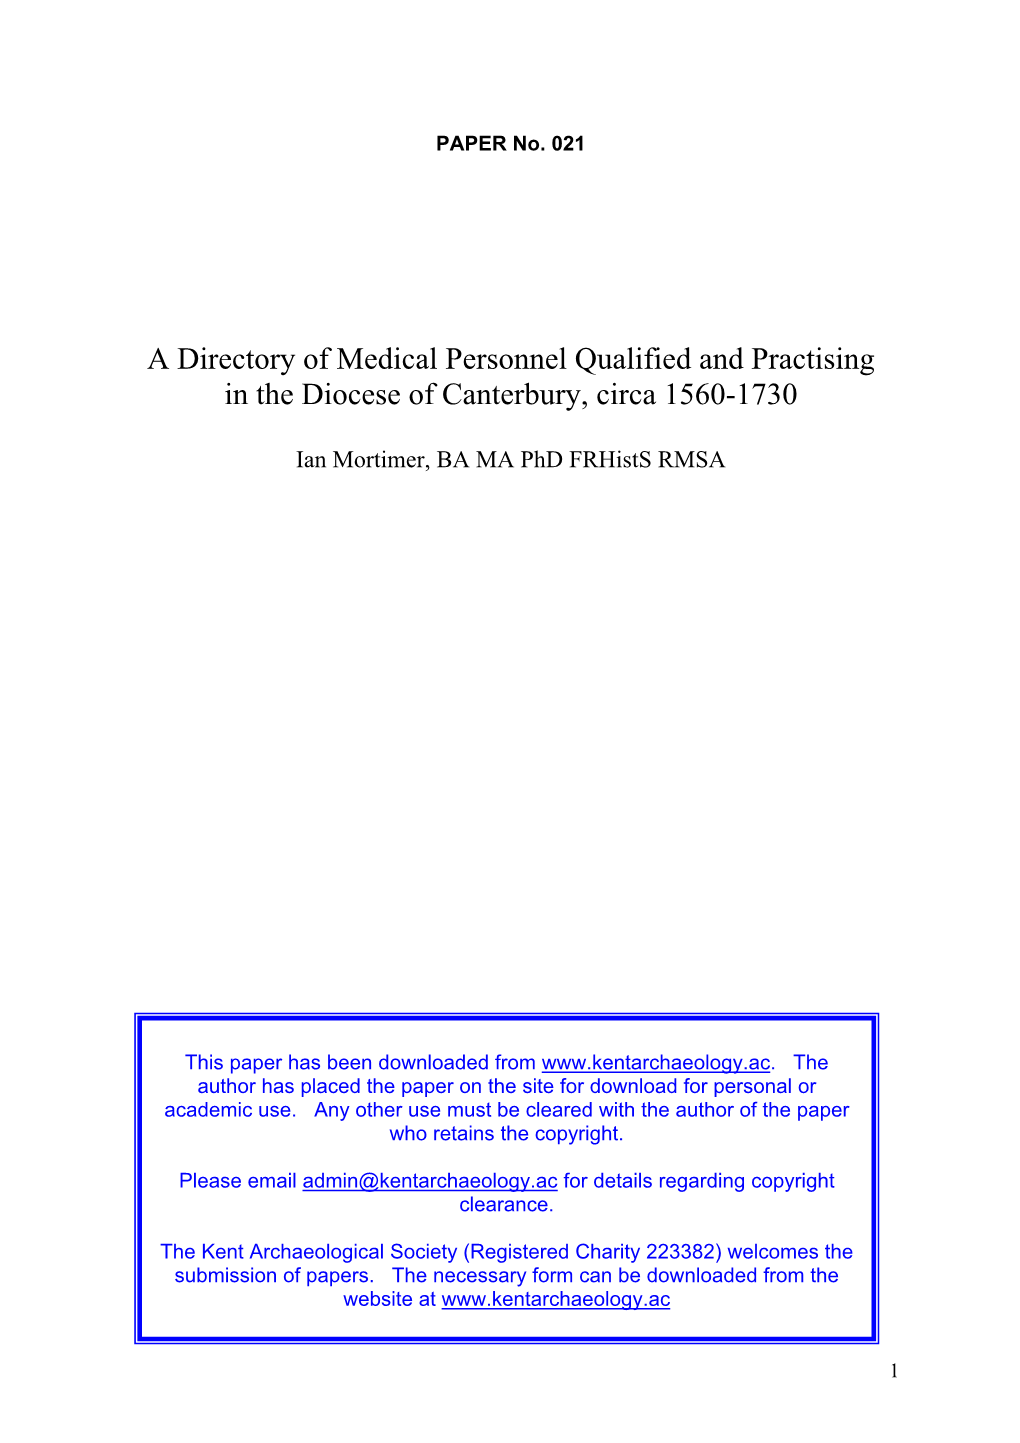 A Directory of Medical Personnel Qualified and Practising in the Diocese of Canterbury, Circa 1560-1730